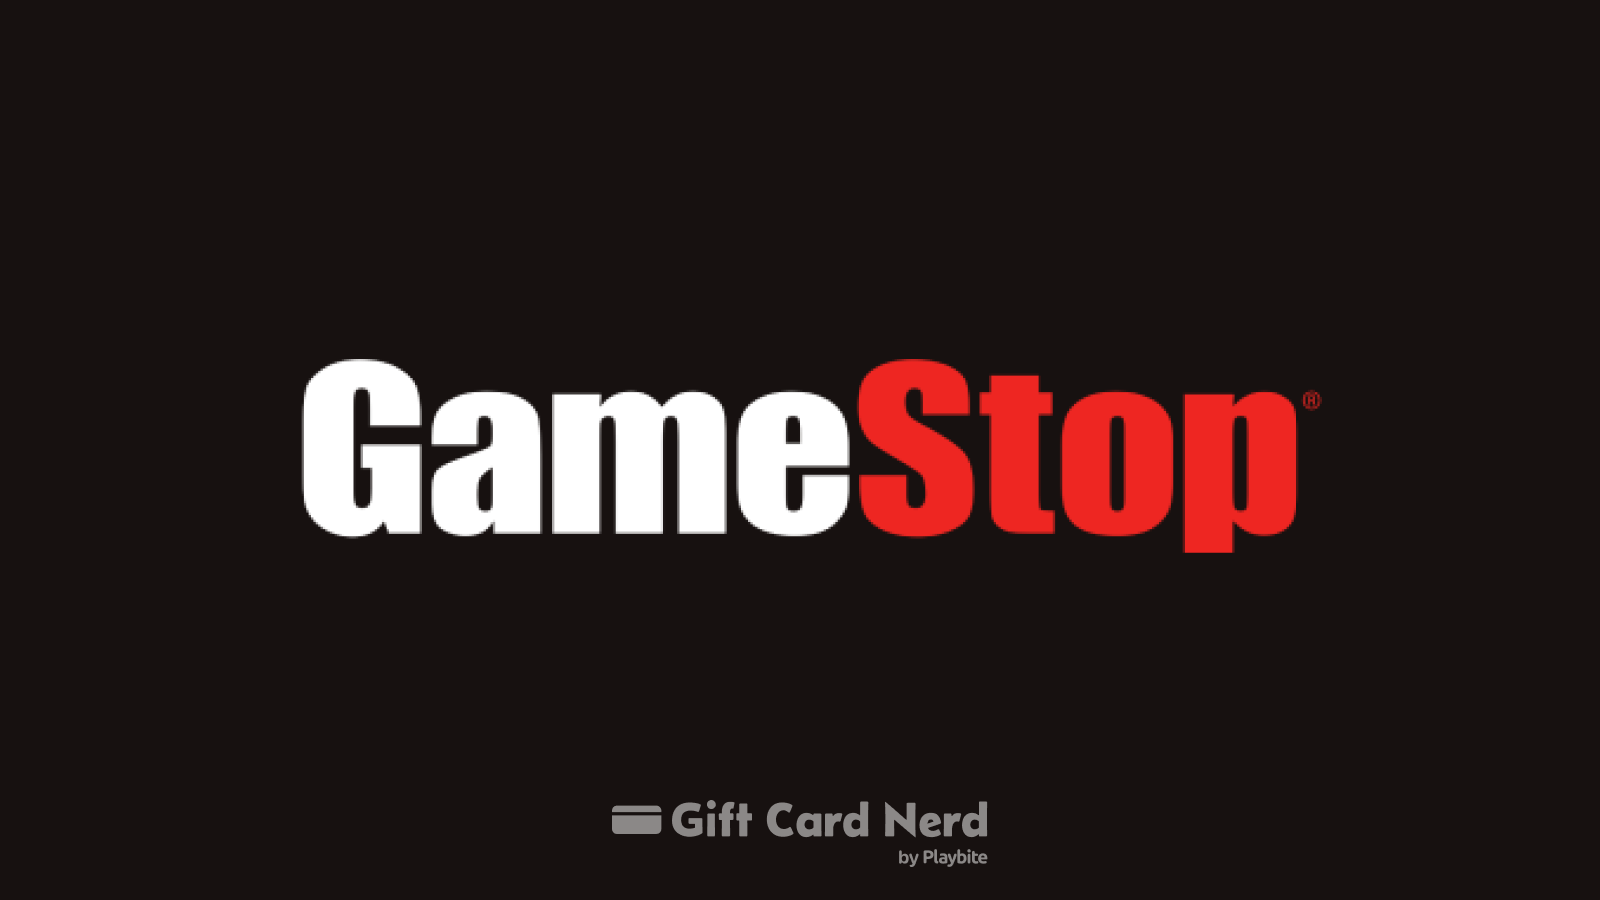 Can I Use a GameStop Gift Card on Amazon?